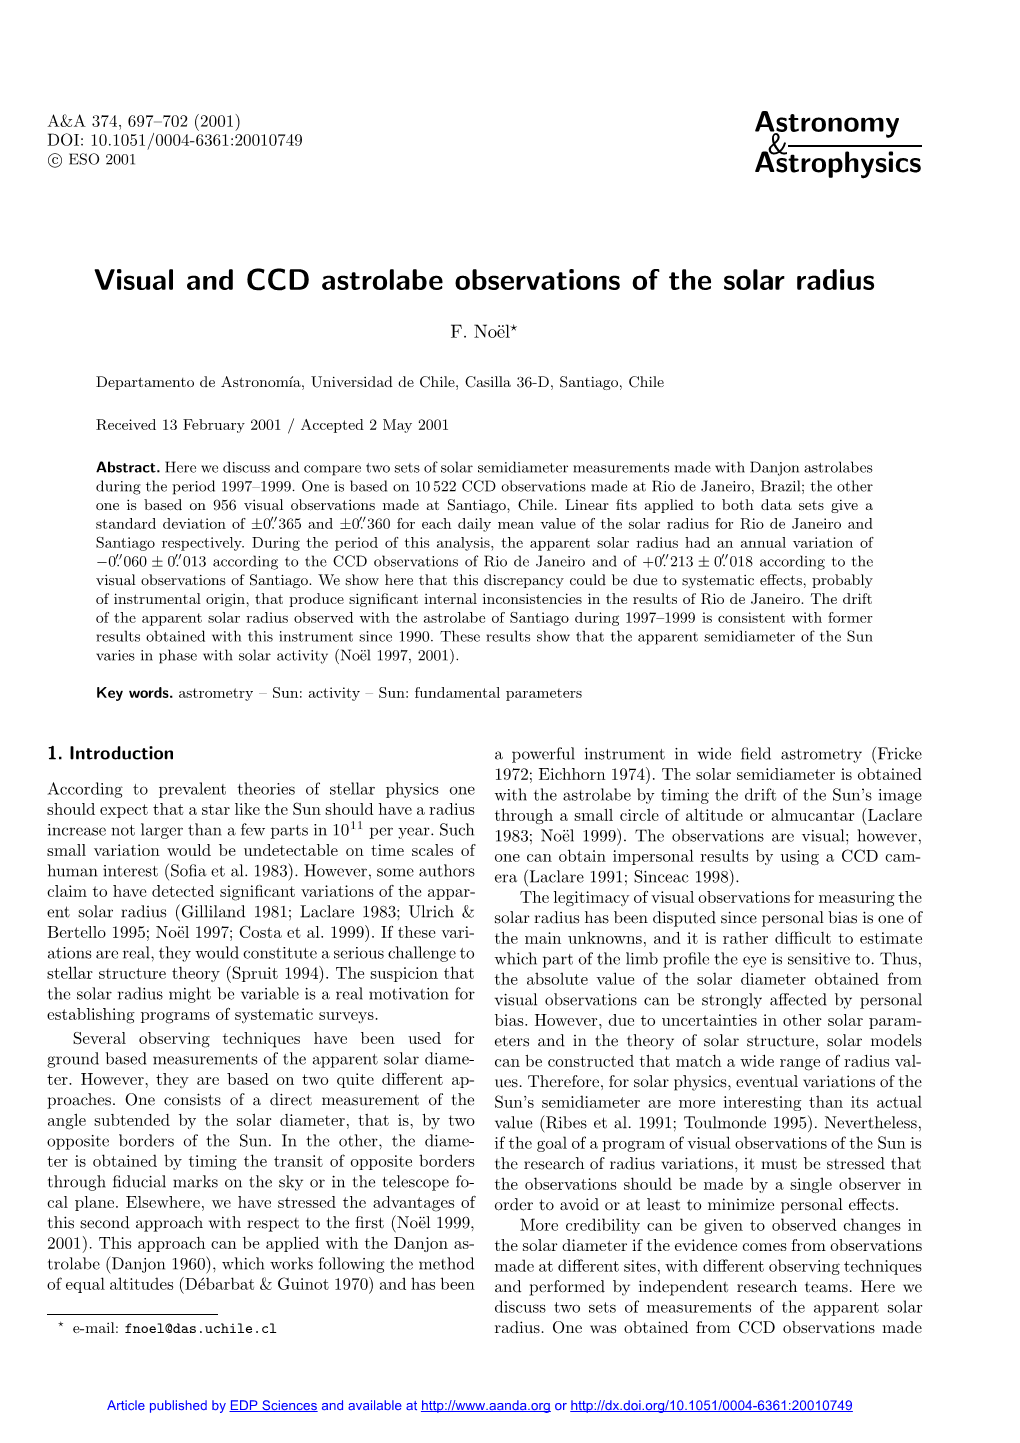 Visual and CCD Astrolabe Observations of the Solar Radius